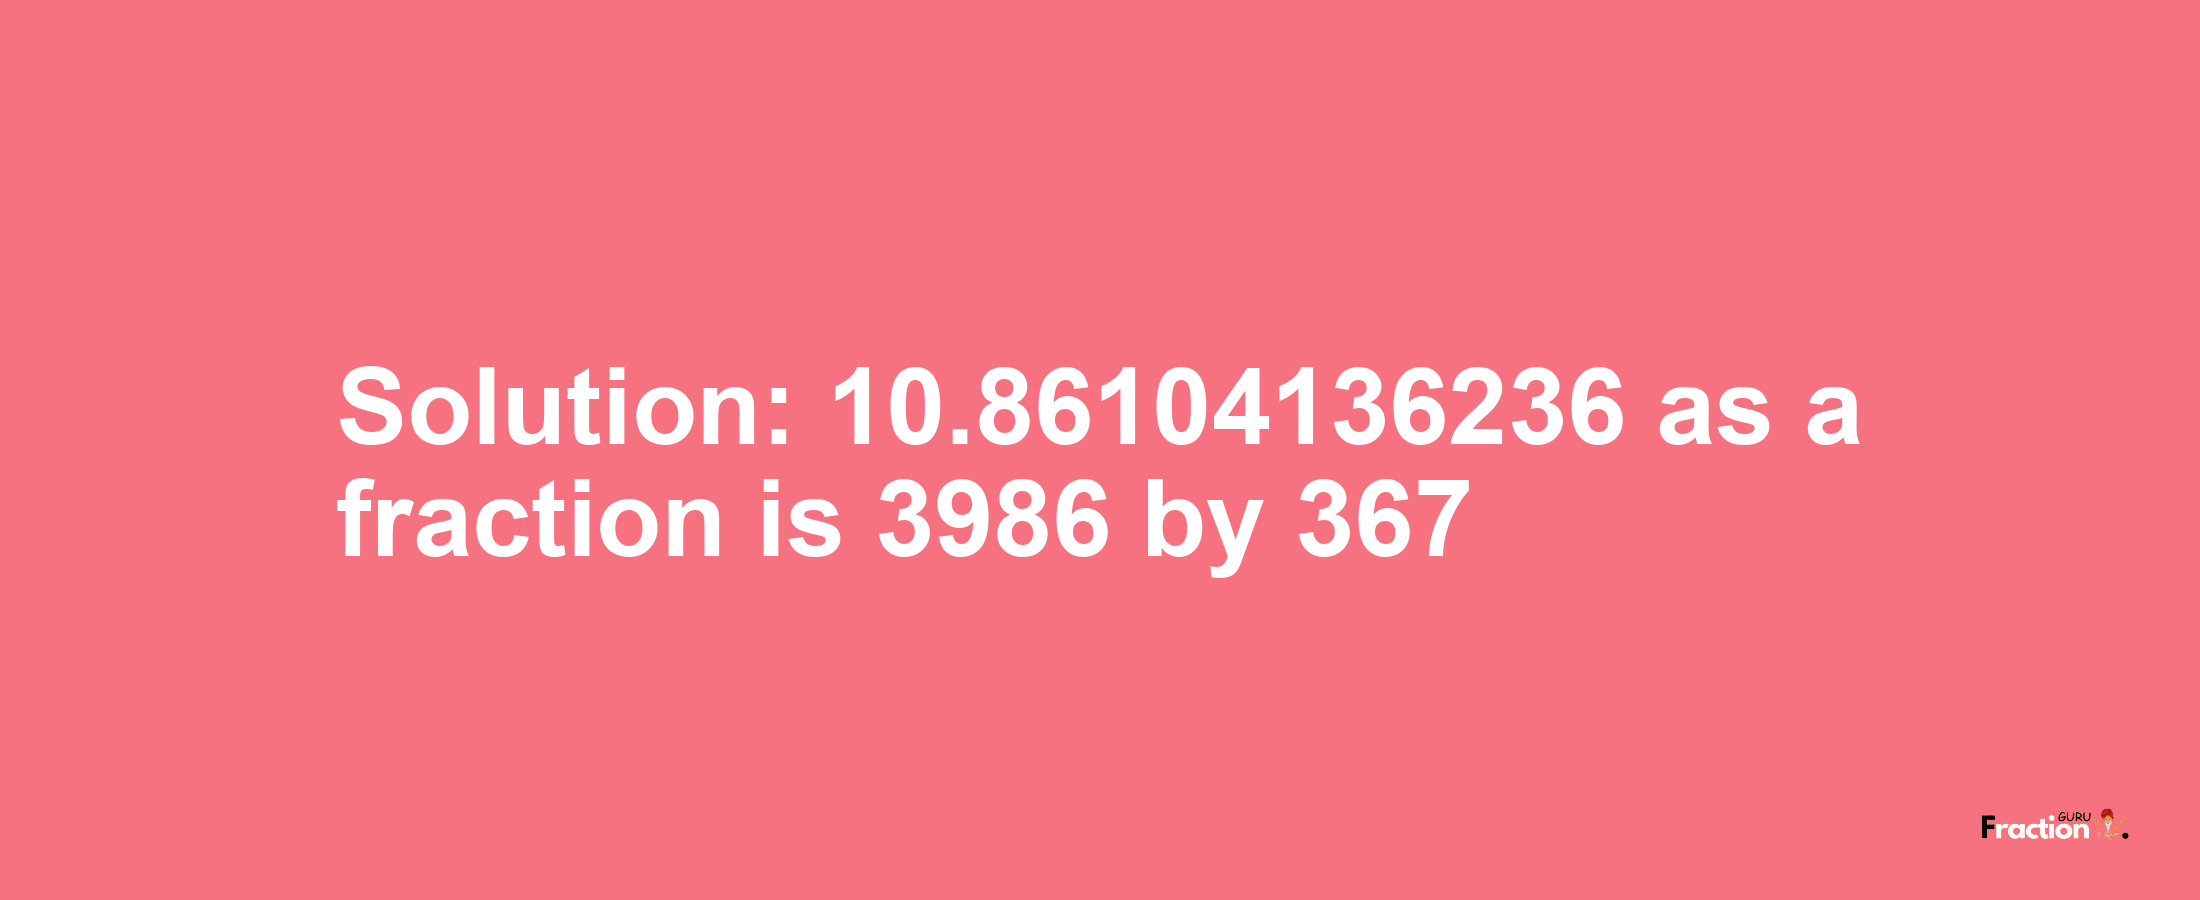 Solution:10.86104136236 as a fraction is 3986/367